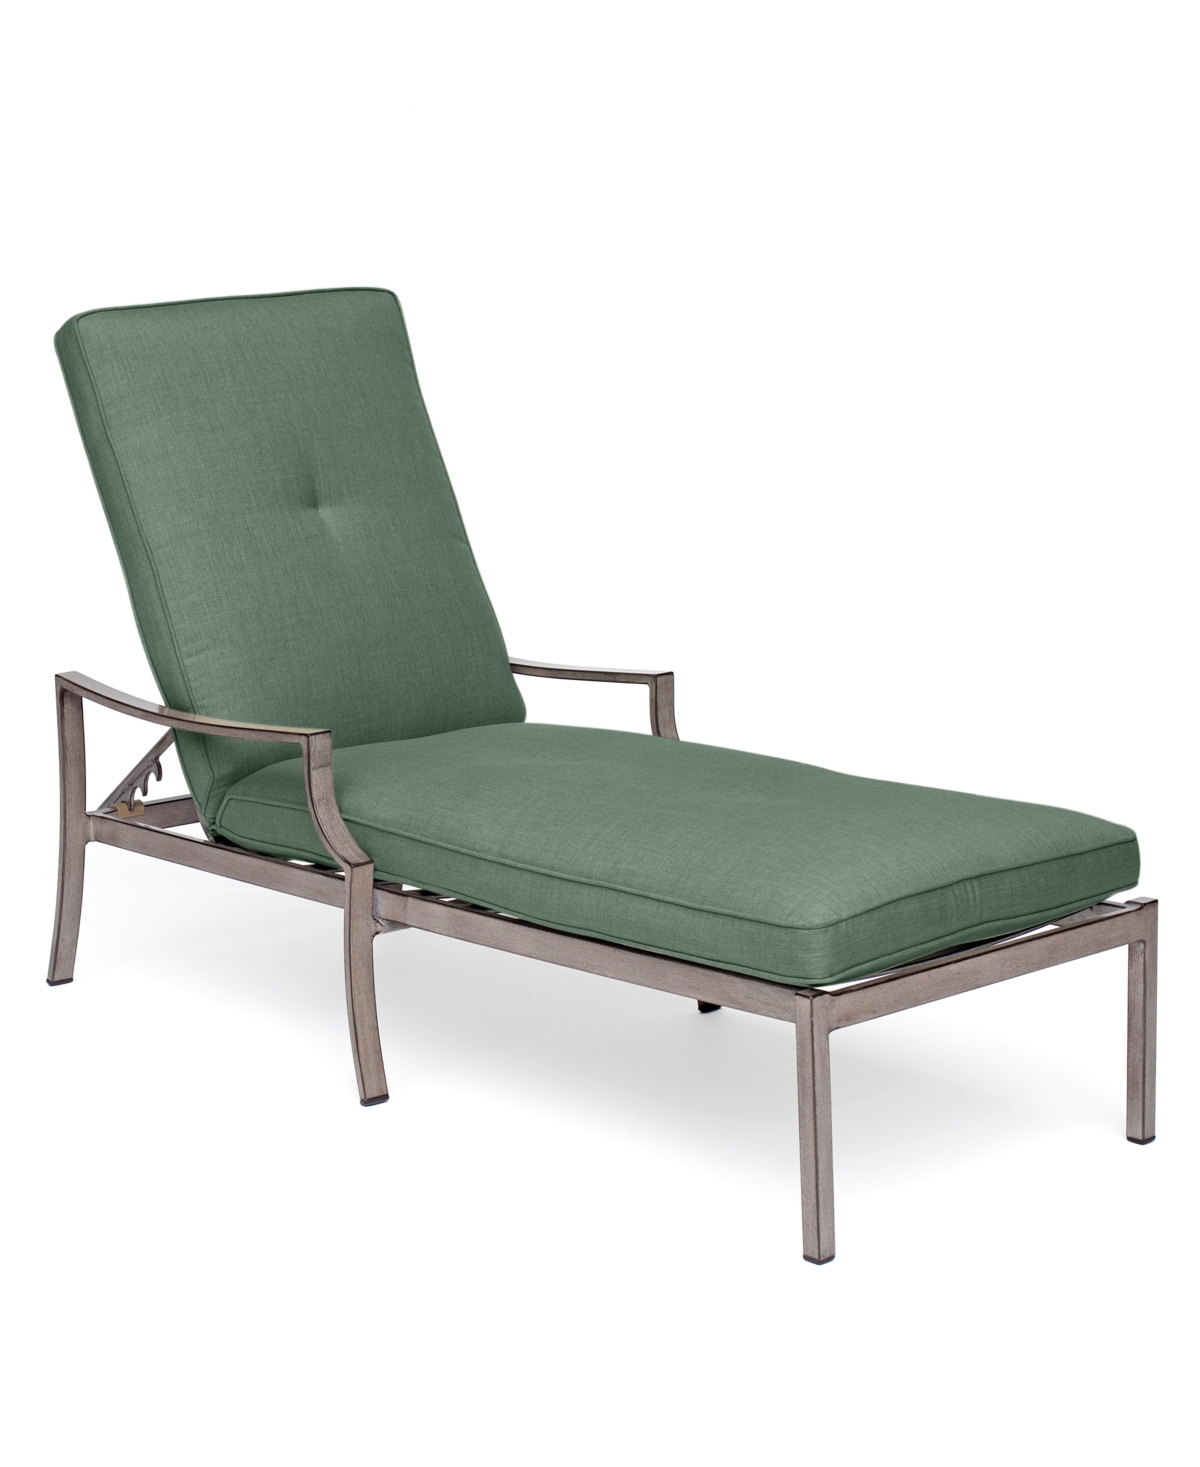 Shop Agio Wayland Outdoor Chaise Lounge, Created For Macy's In Outdura Grasshopper